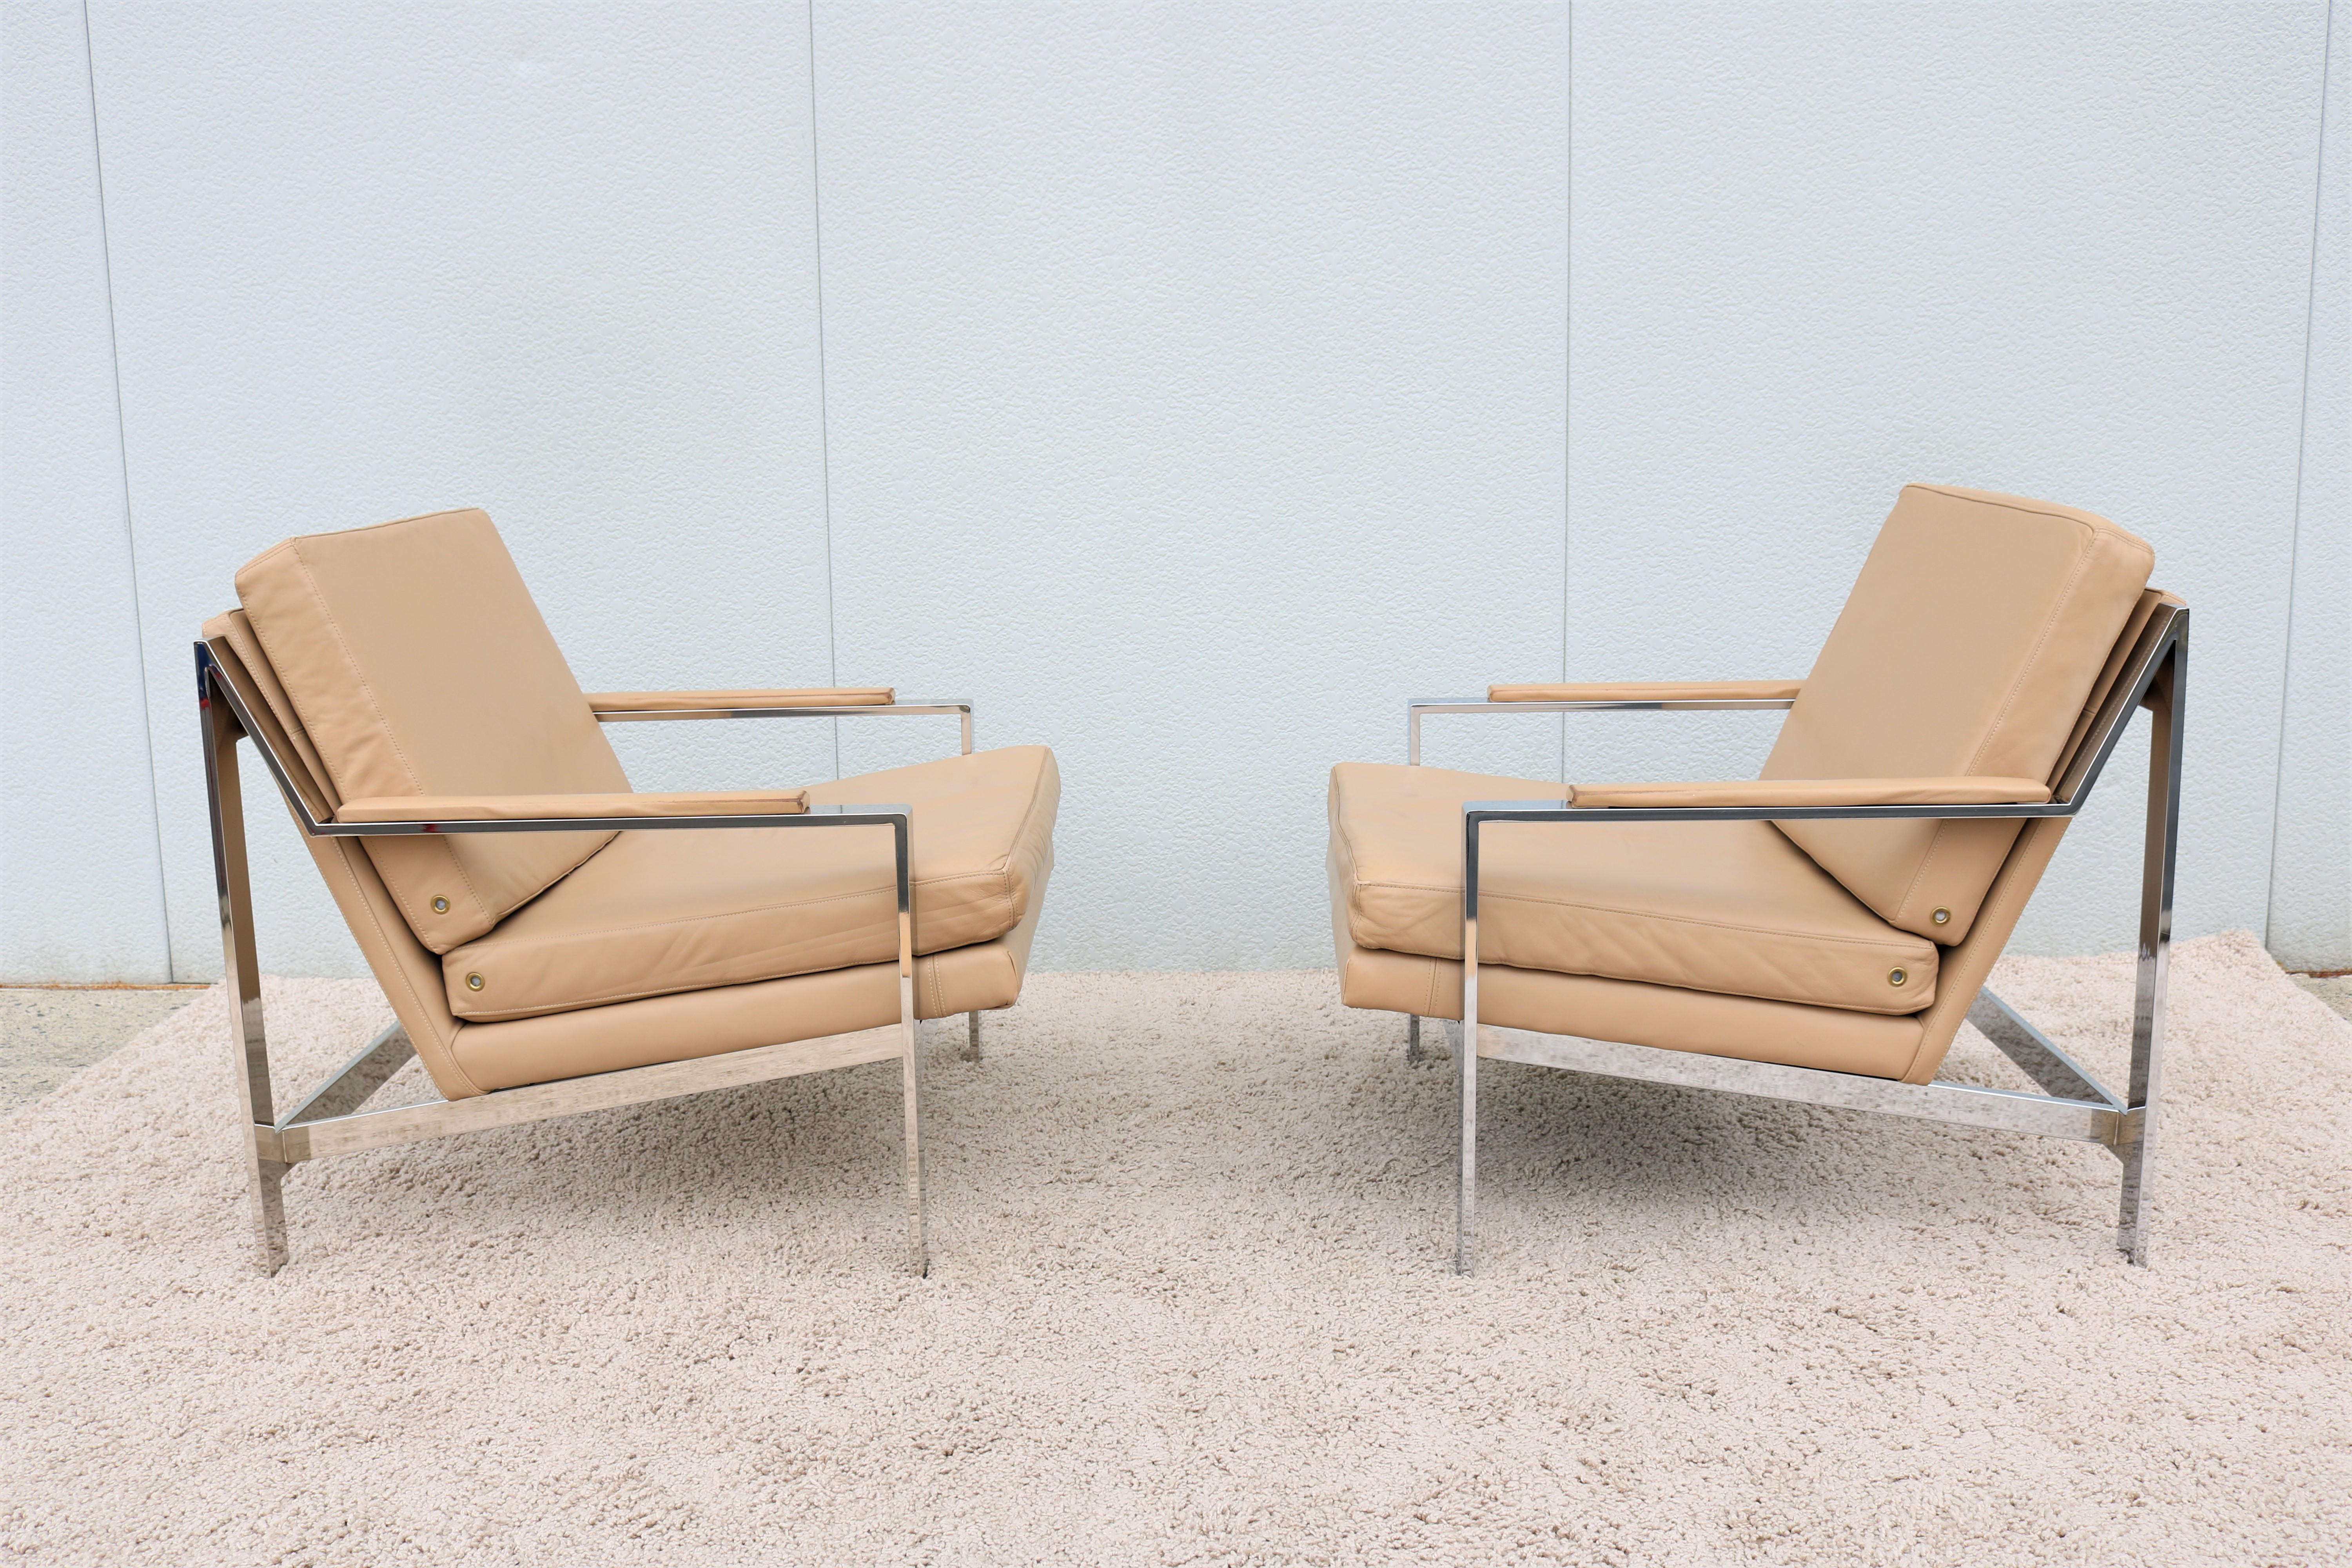 Vintage Cy Mann Leather and Chrome Lounge Chairs in Milo Baughman Style, a Pair For Sale 5